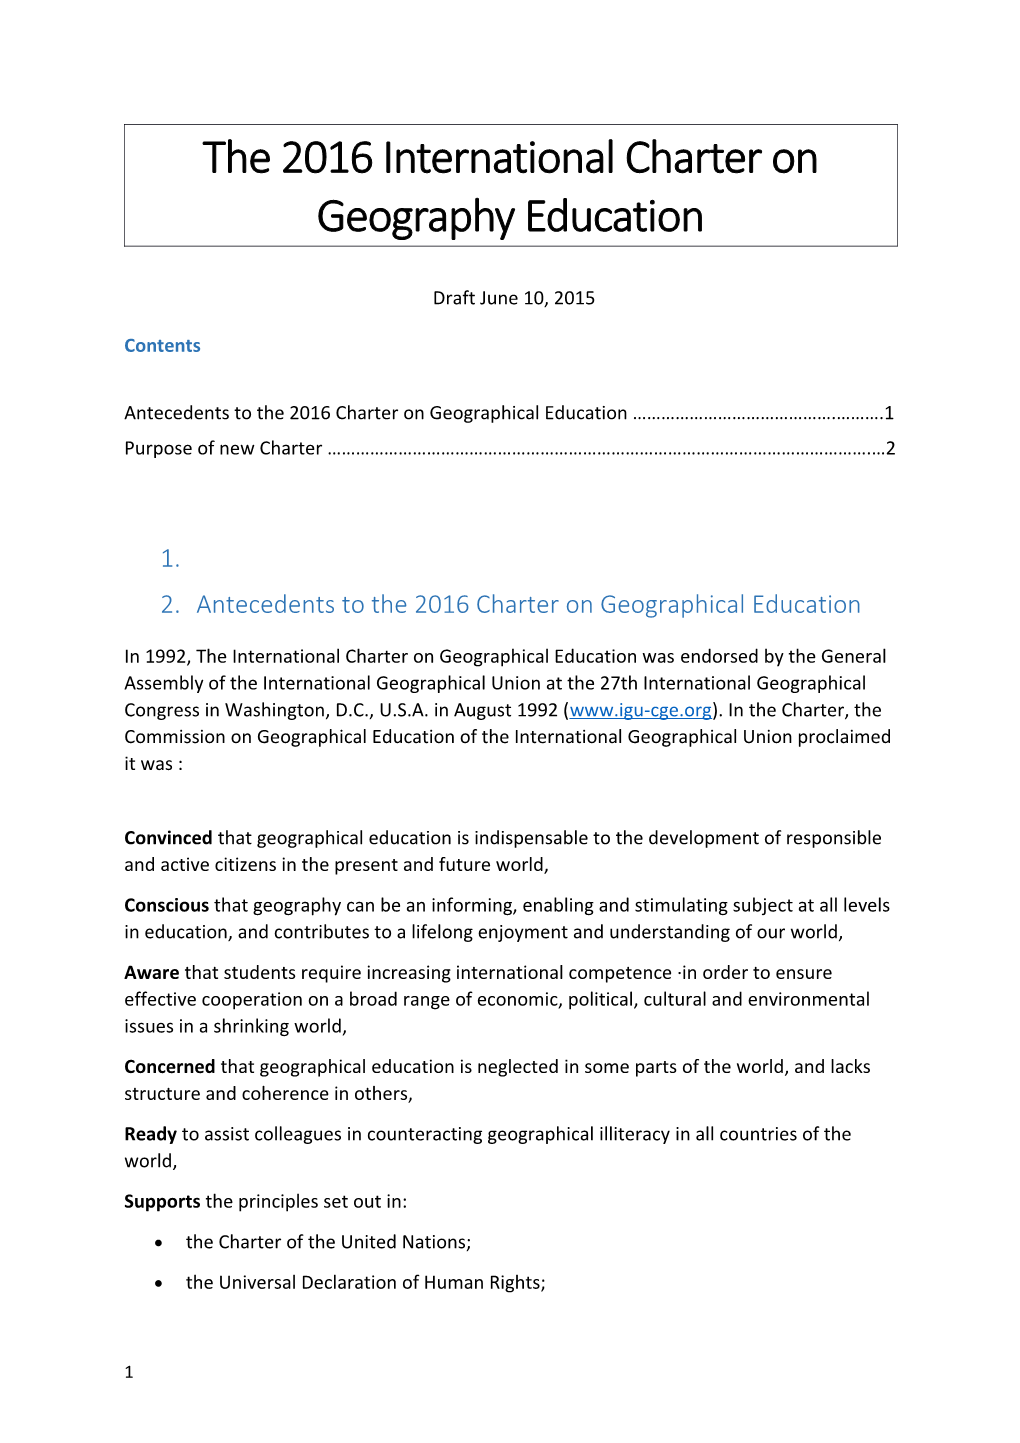 The 2016International Charter on Geography Education